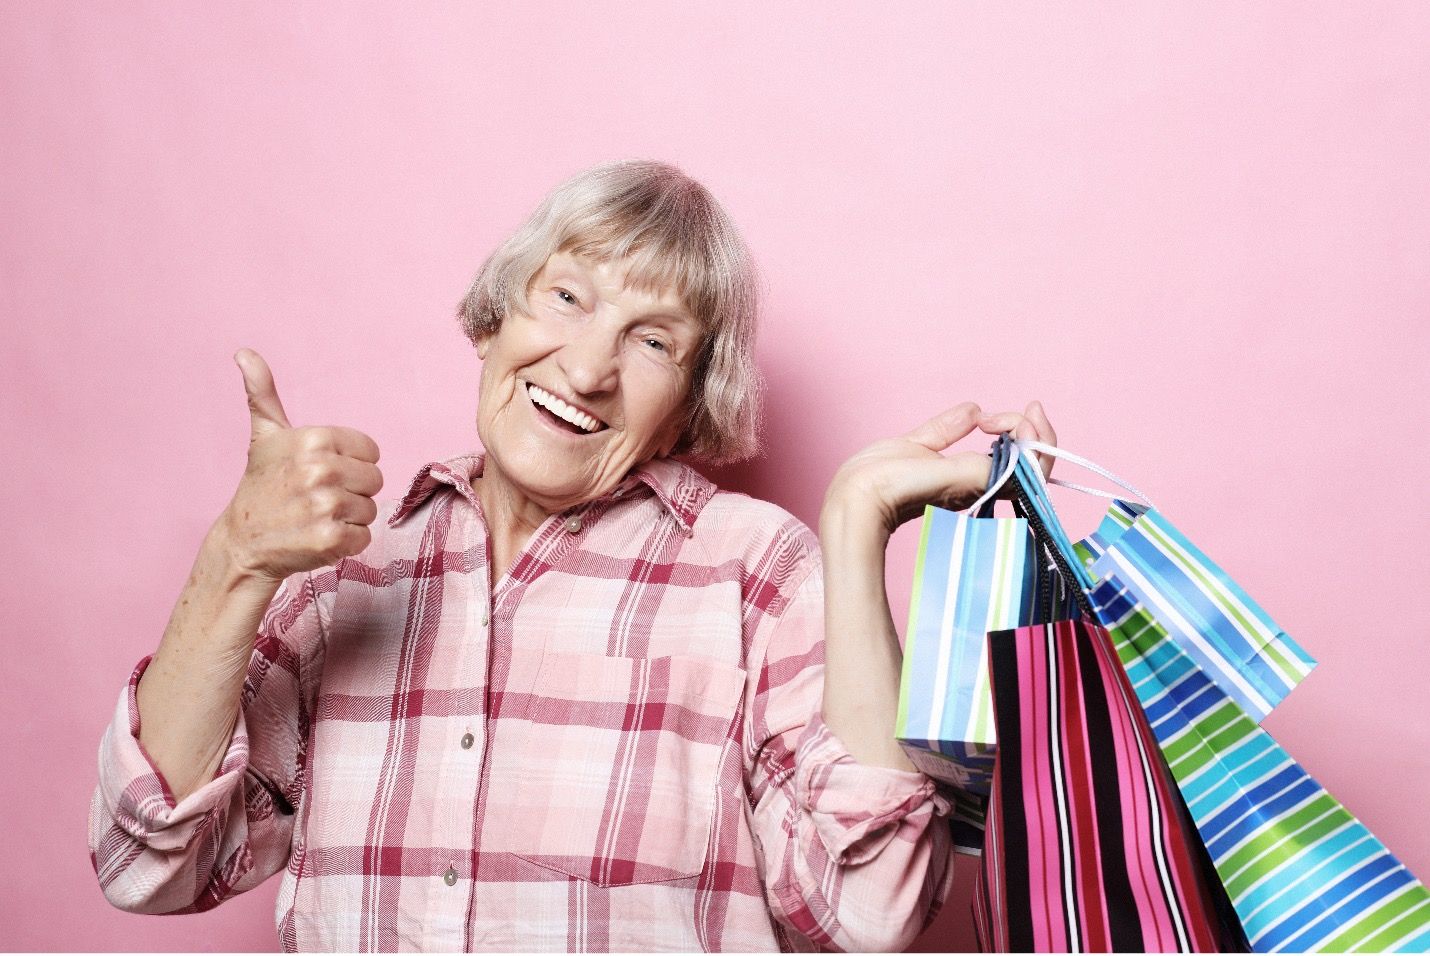 An old woman holding shopping bags smiling